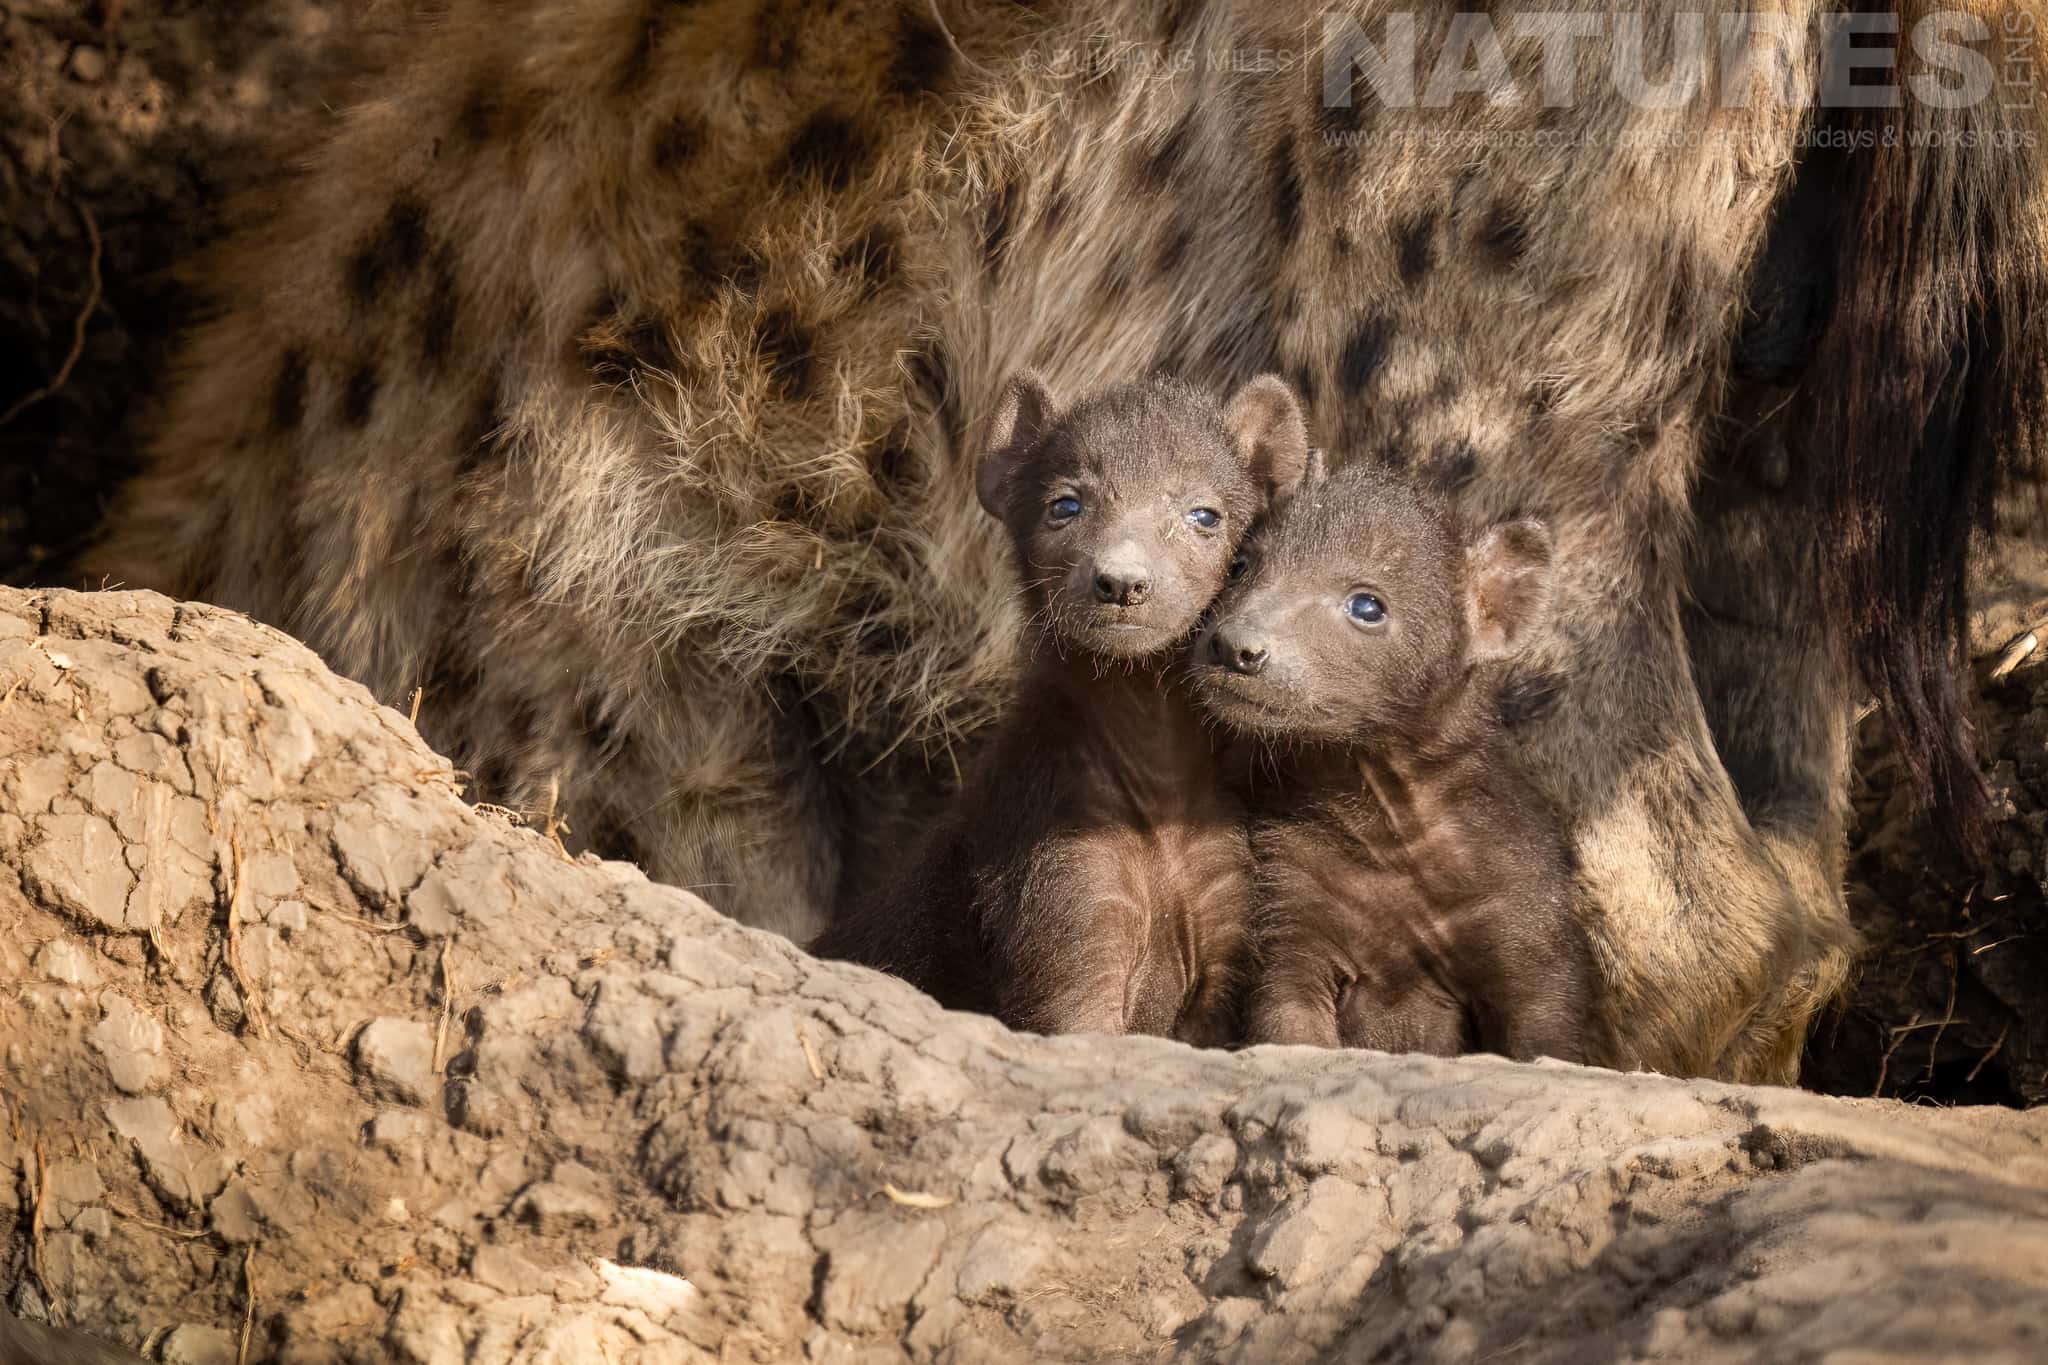 A Pair Of Tiny Hyena Cubs Photographed During A Natureslens Photography Holiday To Photograph The Wildlife Of The Maasai Mara